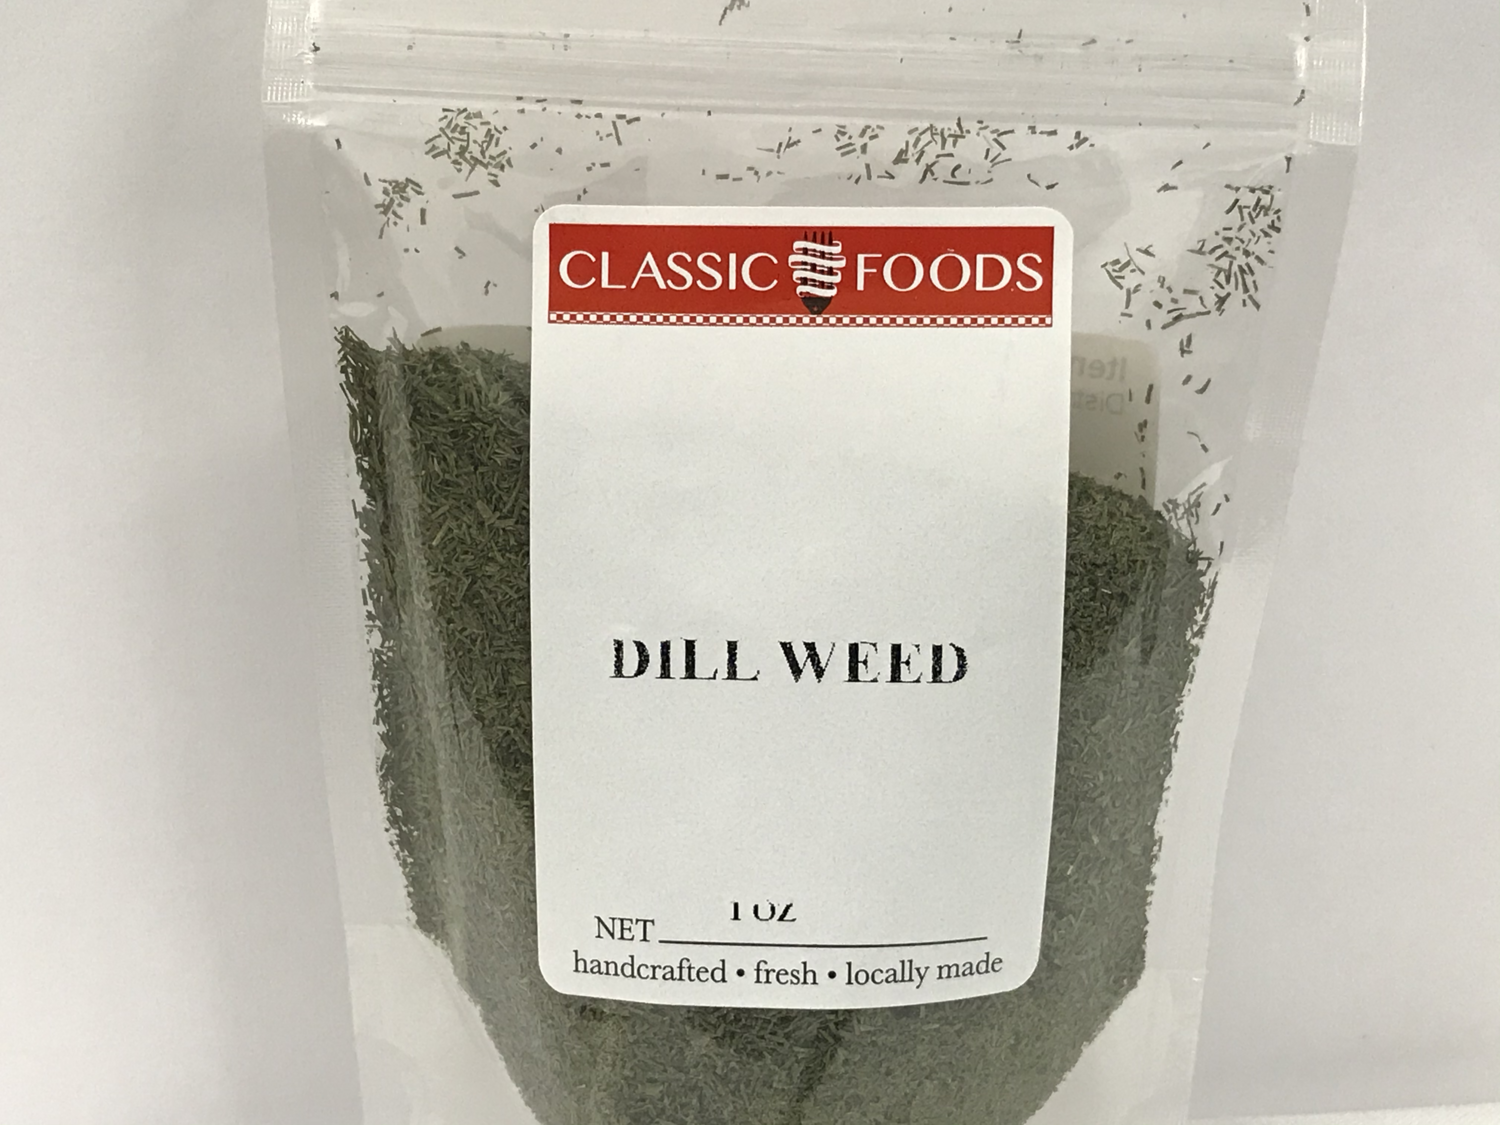 DILL WEED 1 oz